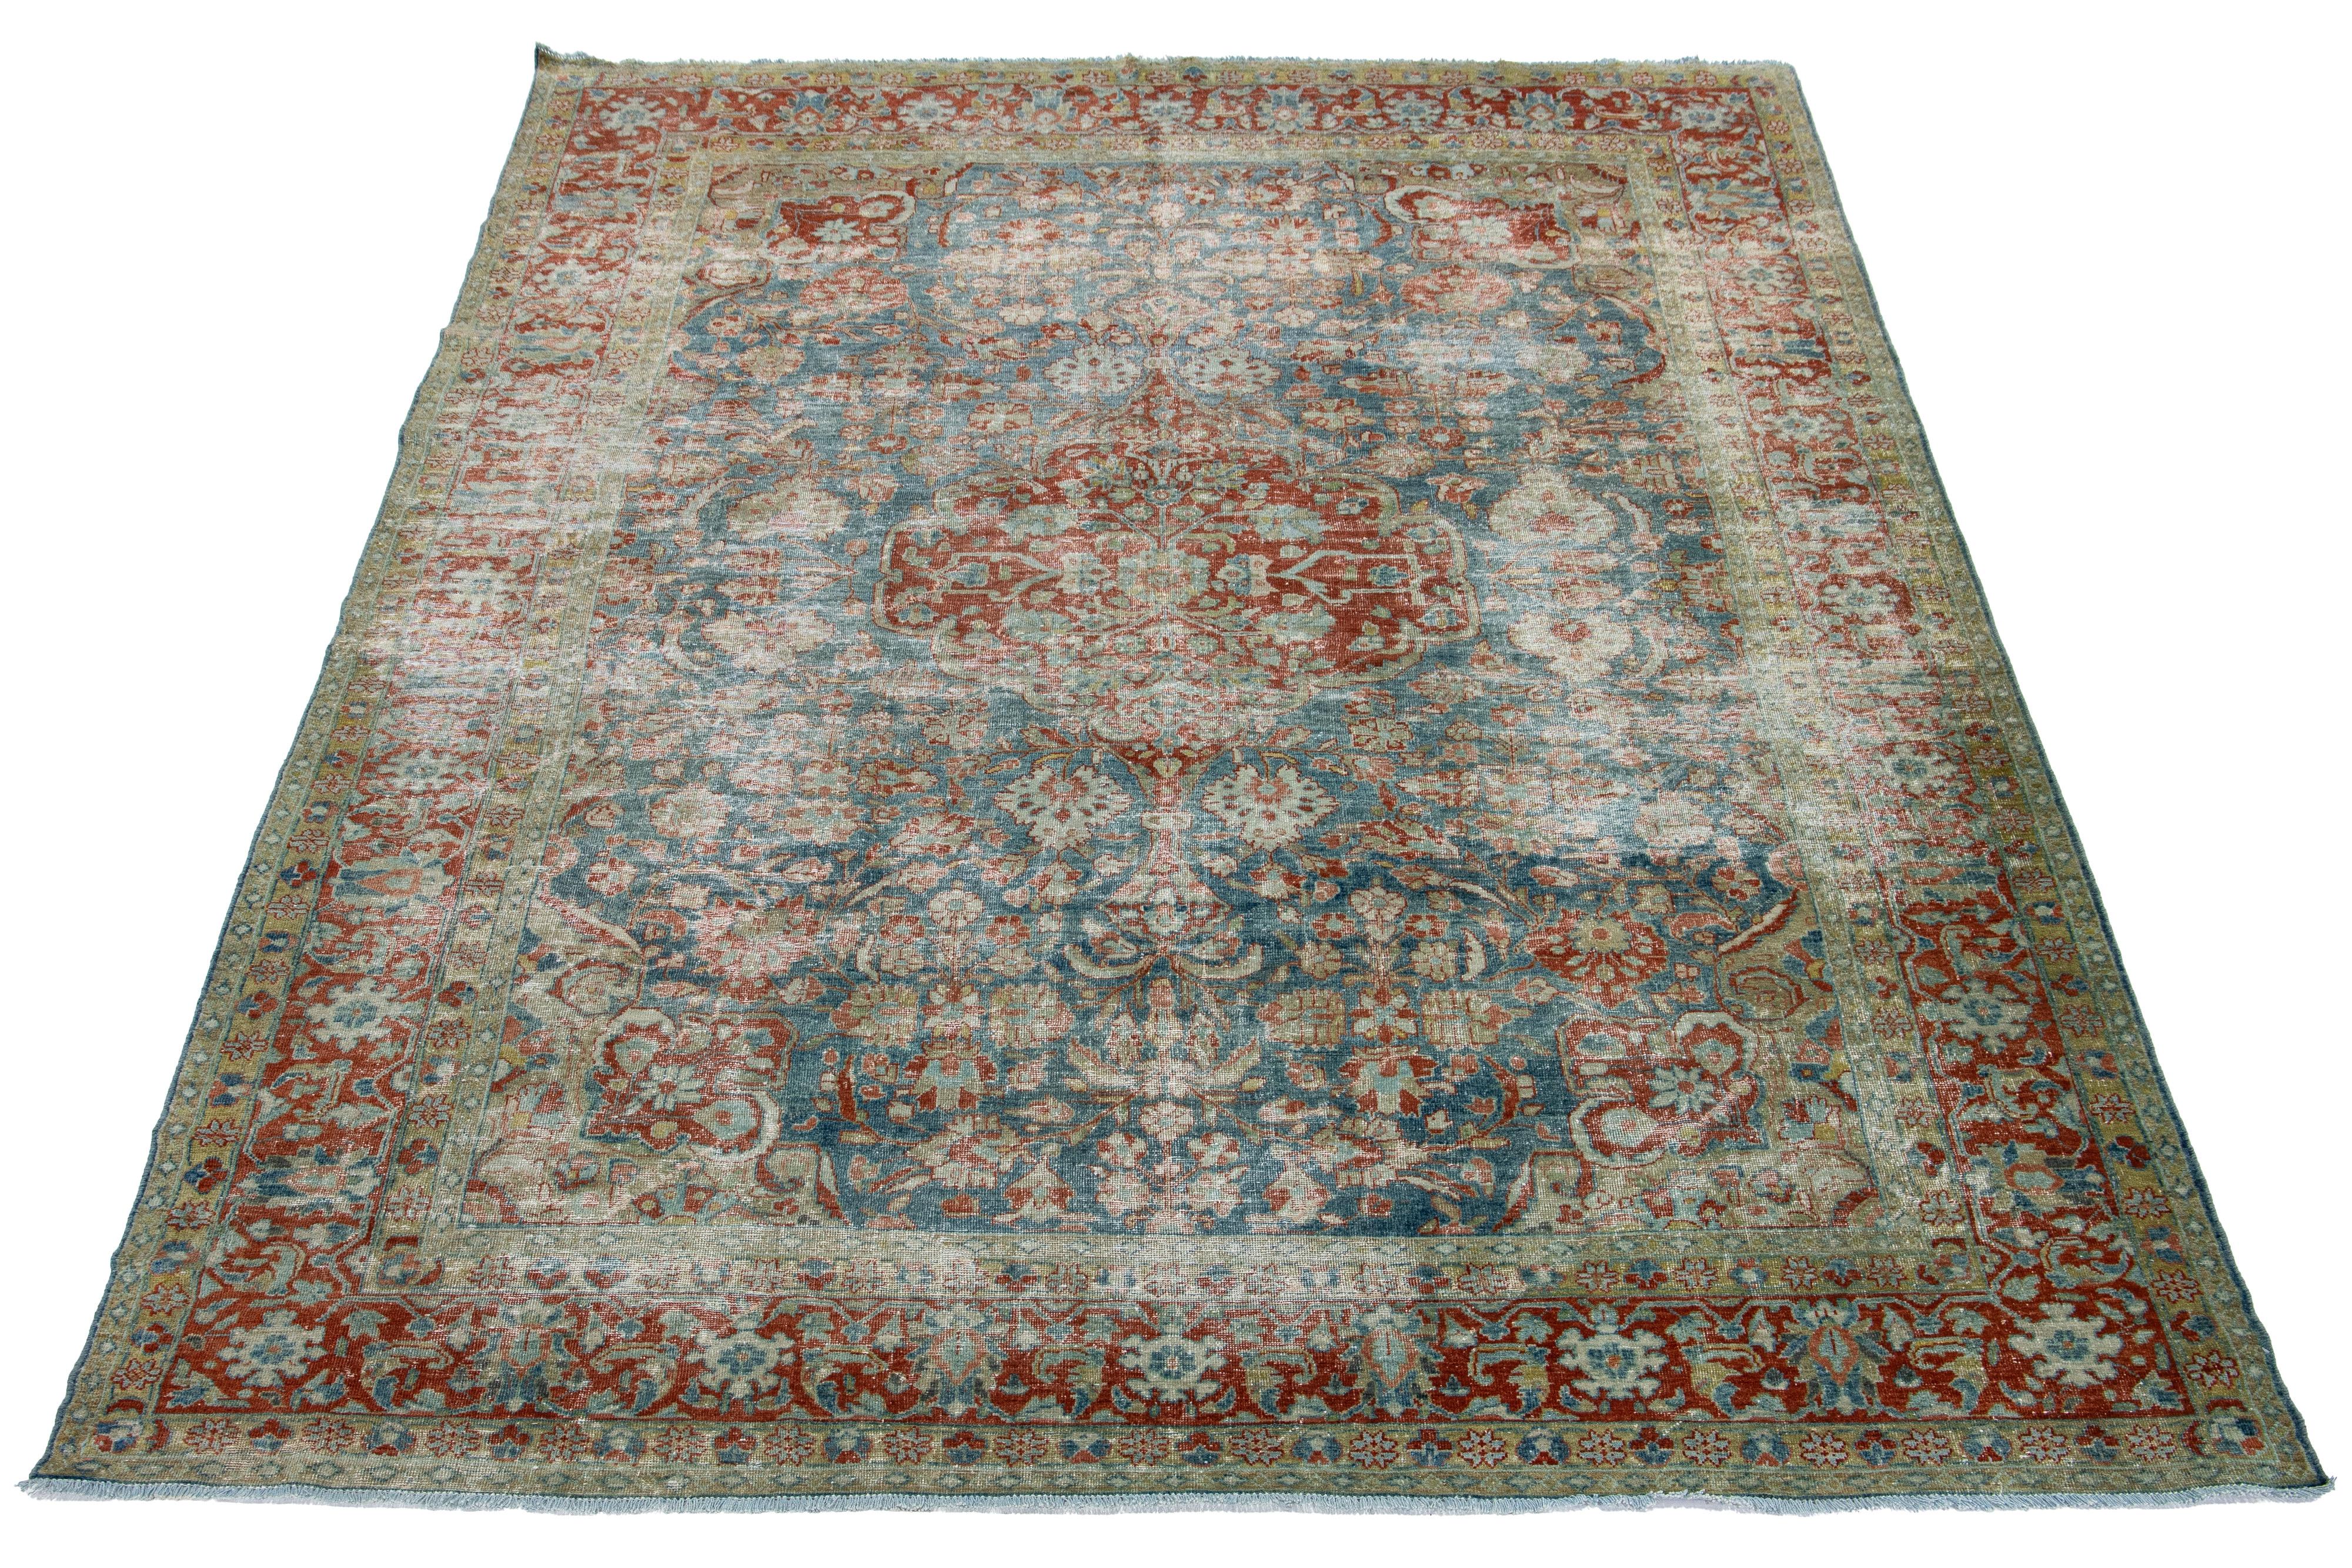 A hand-knotted wool antique Mahal distressed rug has a medallion design with red accents on a blue background.


This rug measures 8'2